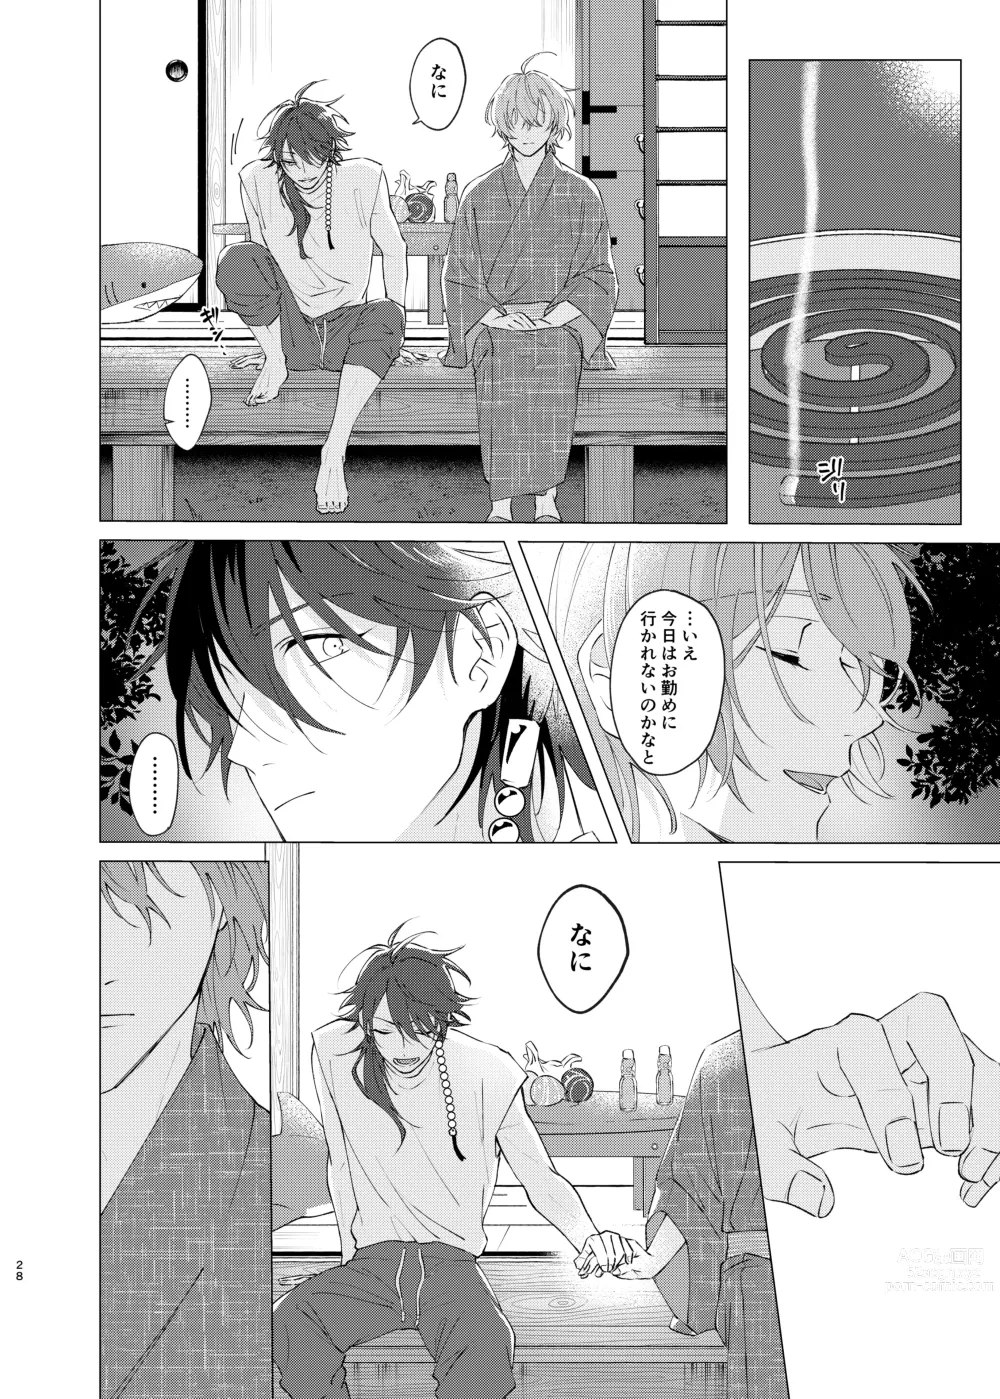 Page 26 of doujinshi Im leaving for good.